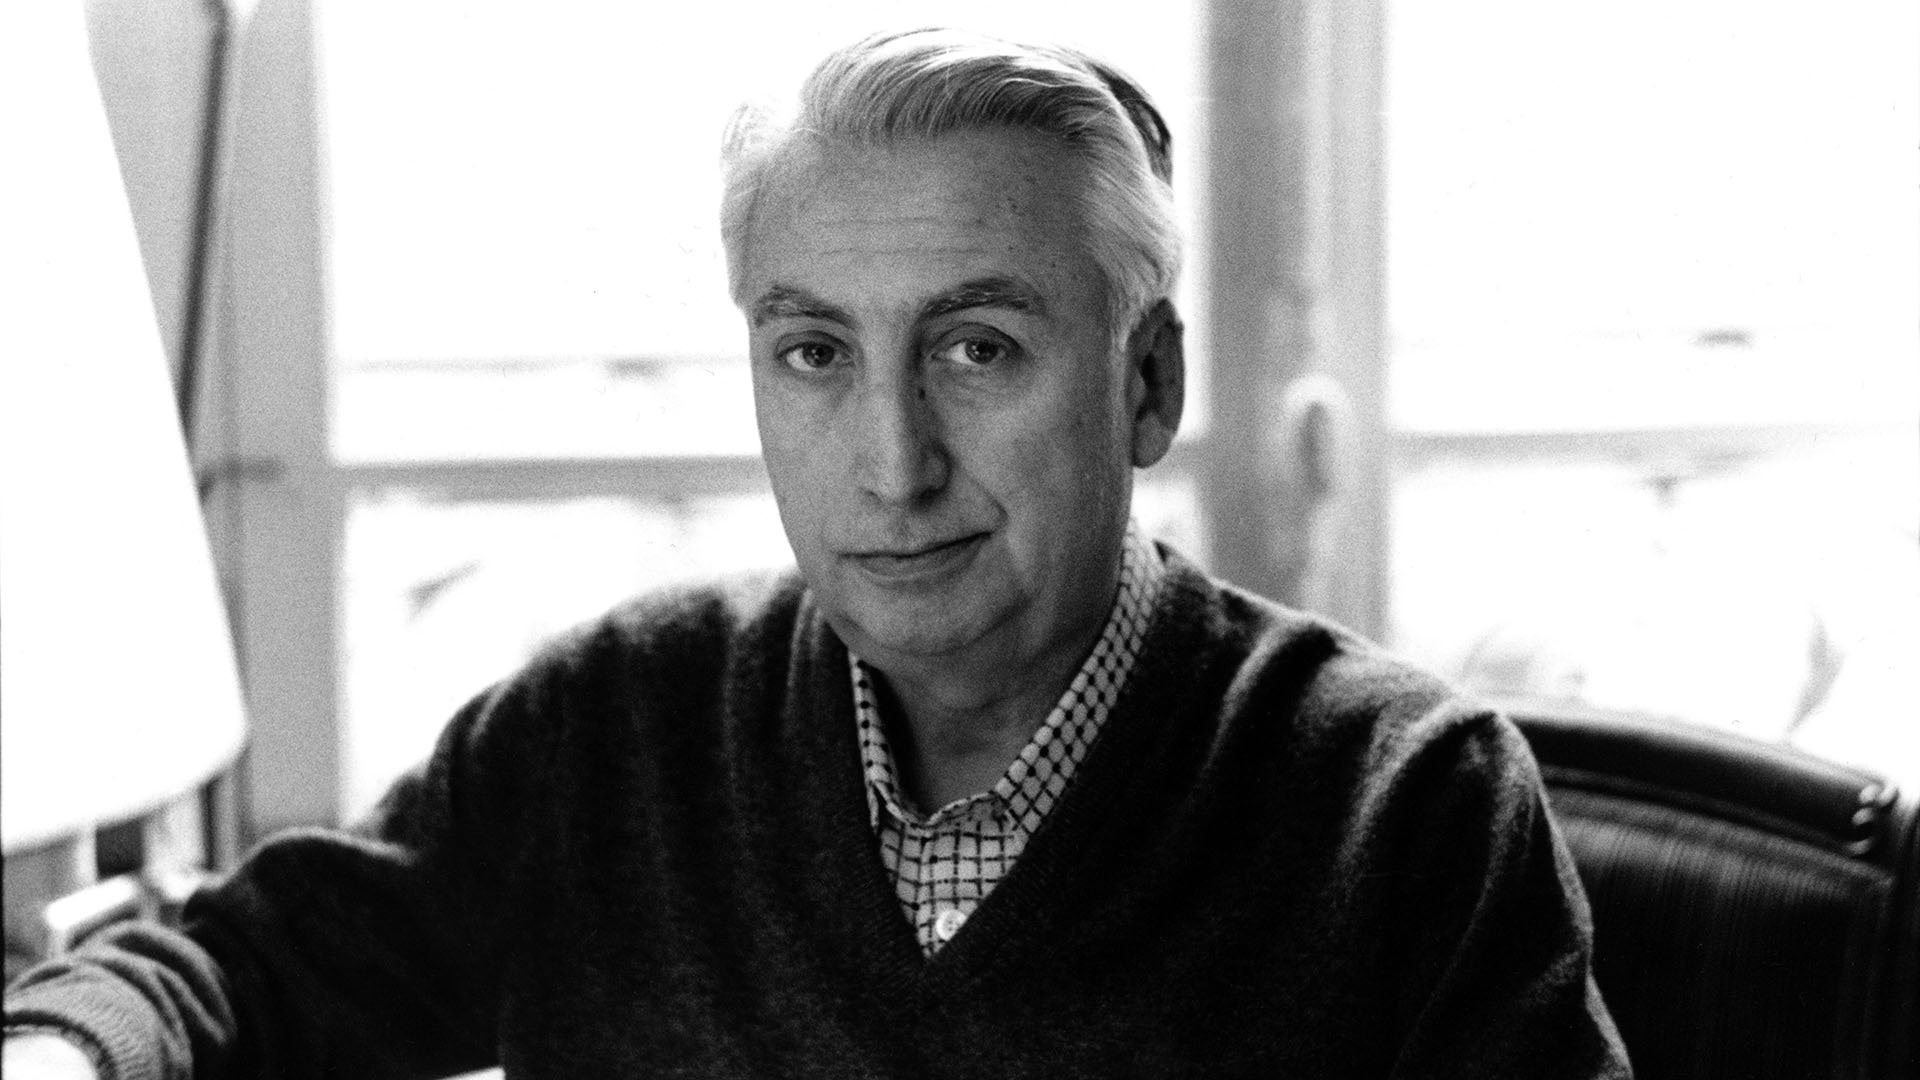 PARIS, FRANCE - JANUARY 20:  French writer and essayist Roland Barthes poses during a portrait session held on January 20, 1979 in Paris, France. (Photo by Ulf Andersen/Getty Images)